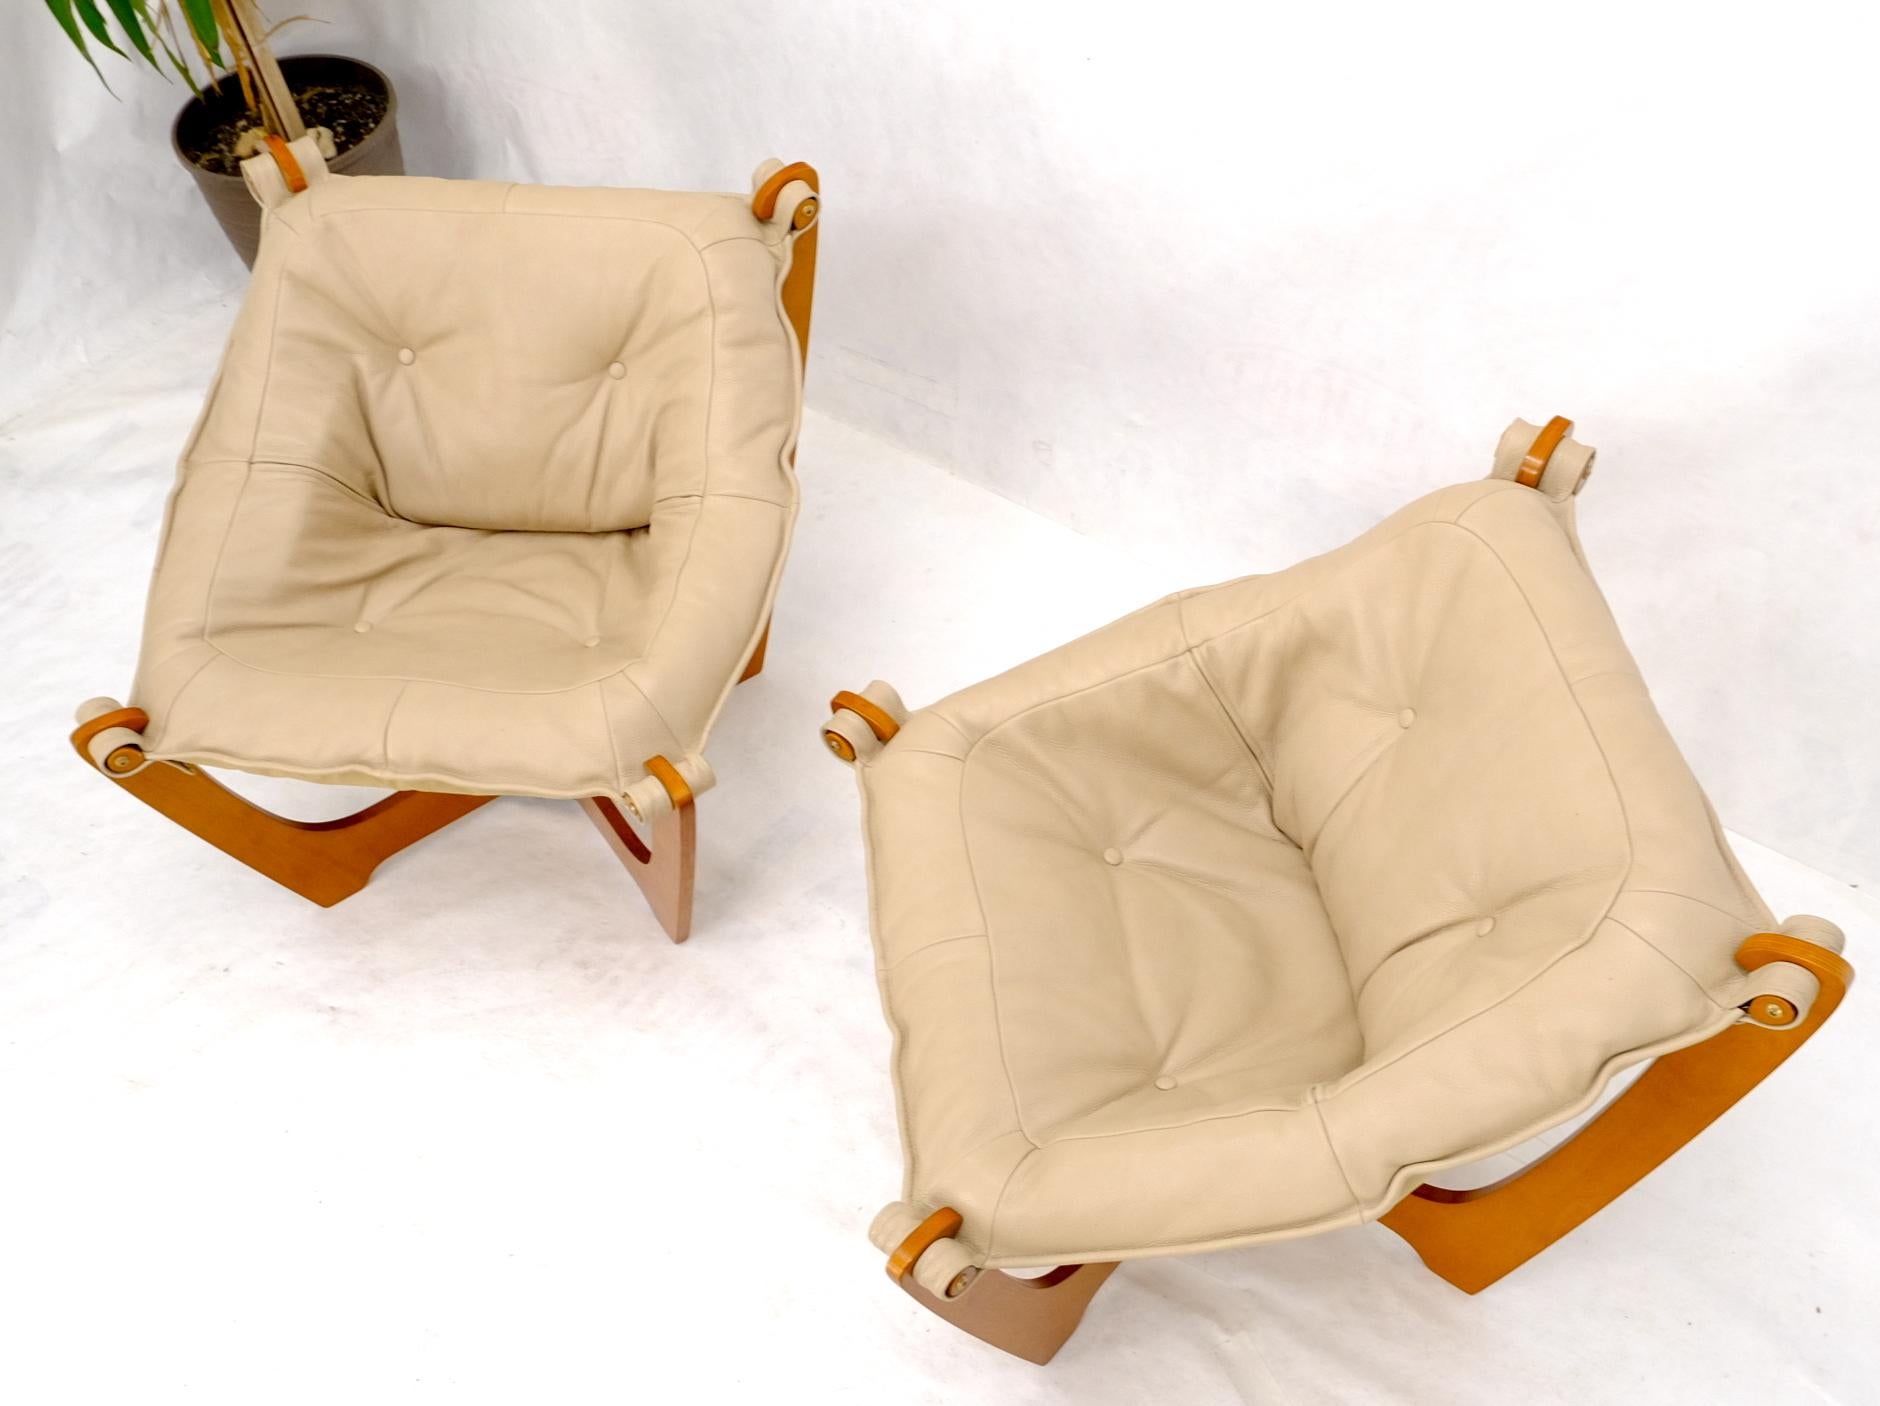 Mid-Century Modern Pair of Mid Century Danish Modern Teak Frames Leather Sling Seat Lounge Chairs For Sale